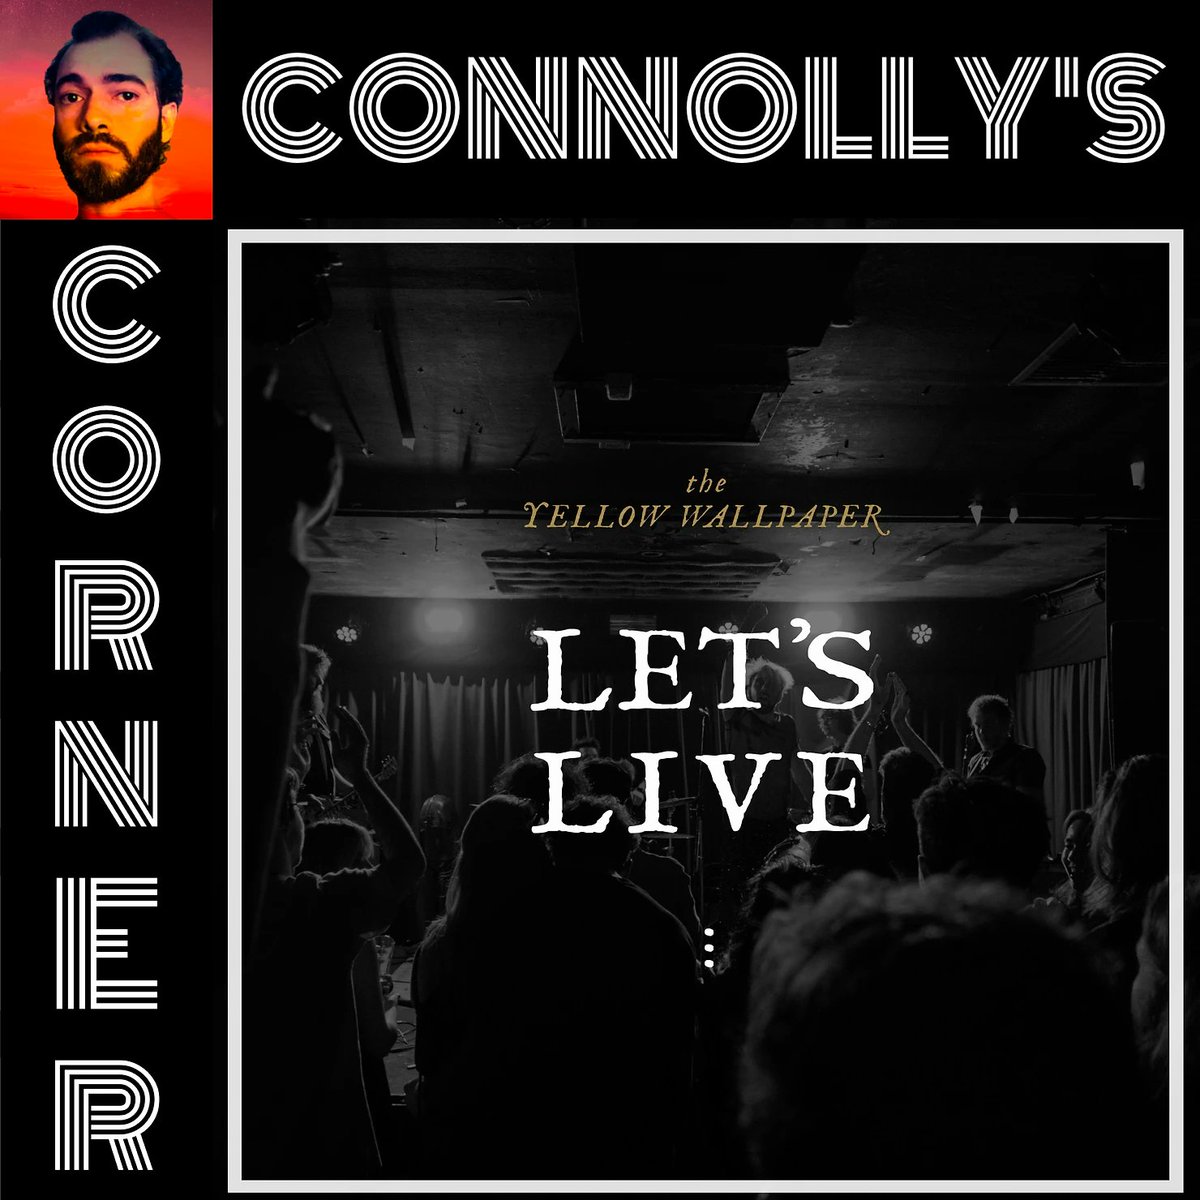 A heartwarming read for this Tuesday's Connolly's Corner with @ConnollyTunes featuring @YellowWallMusic newartistspotlight.org/post/this-week… #IwantmyNAS #stoppayola #newartistspotlight #indiemusic